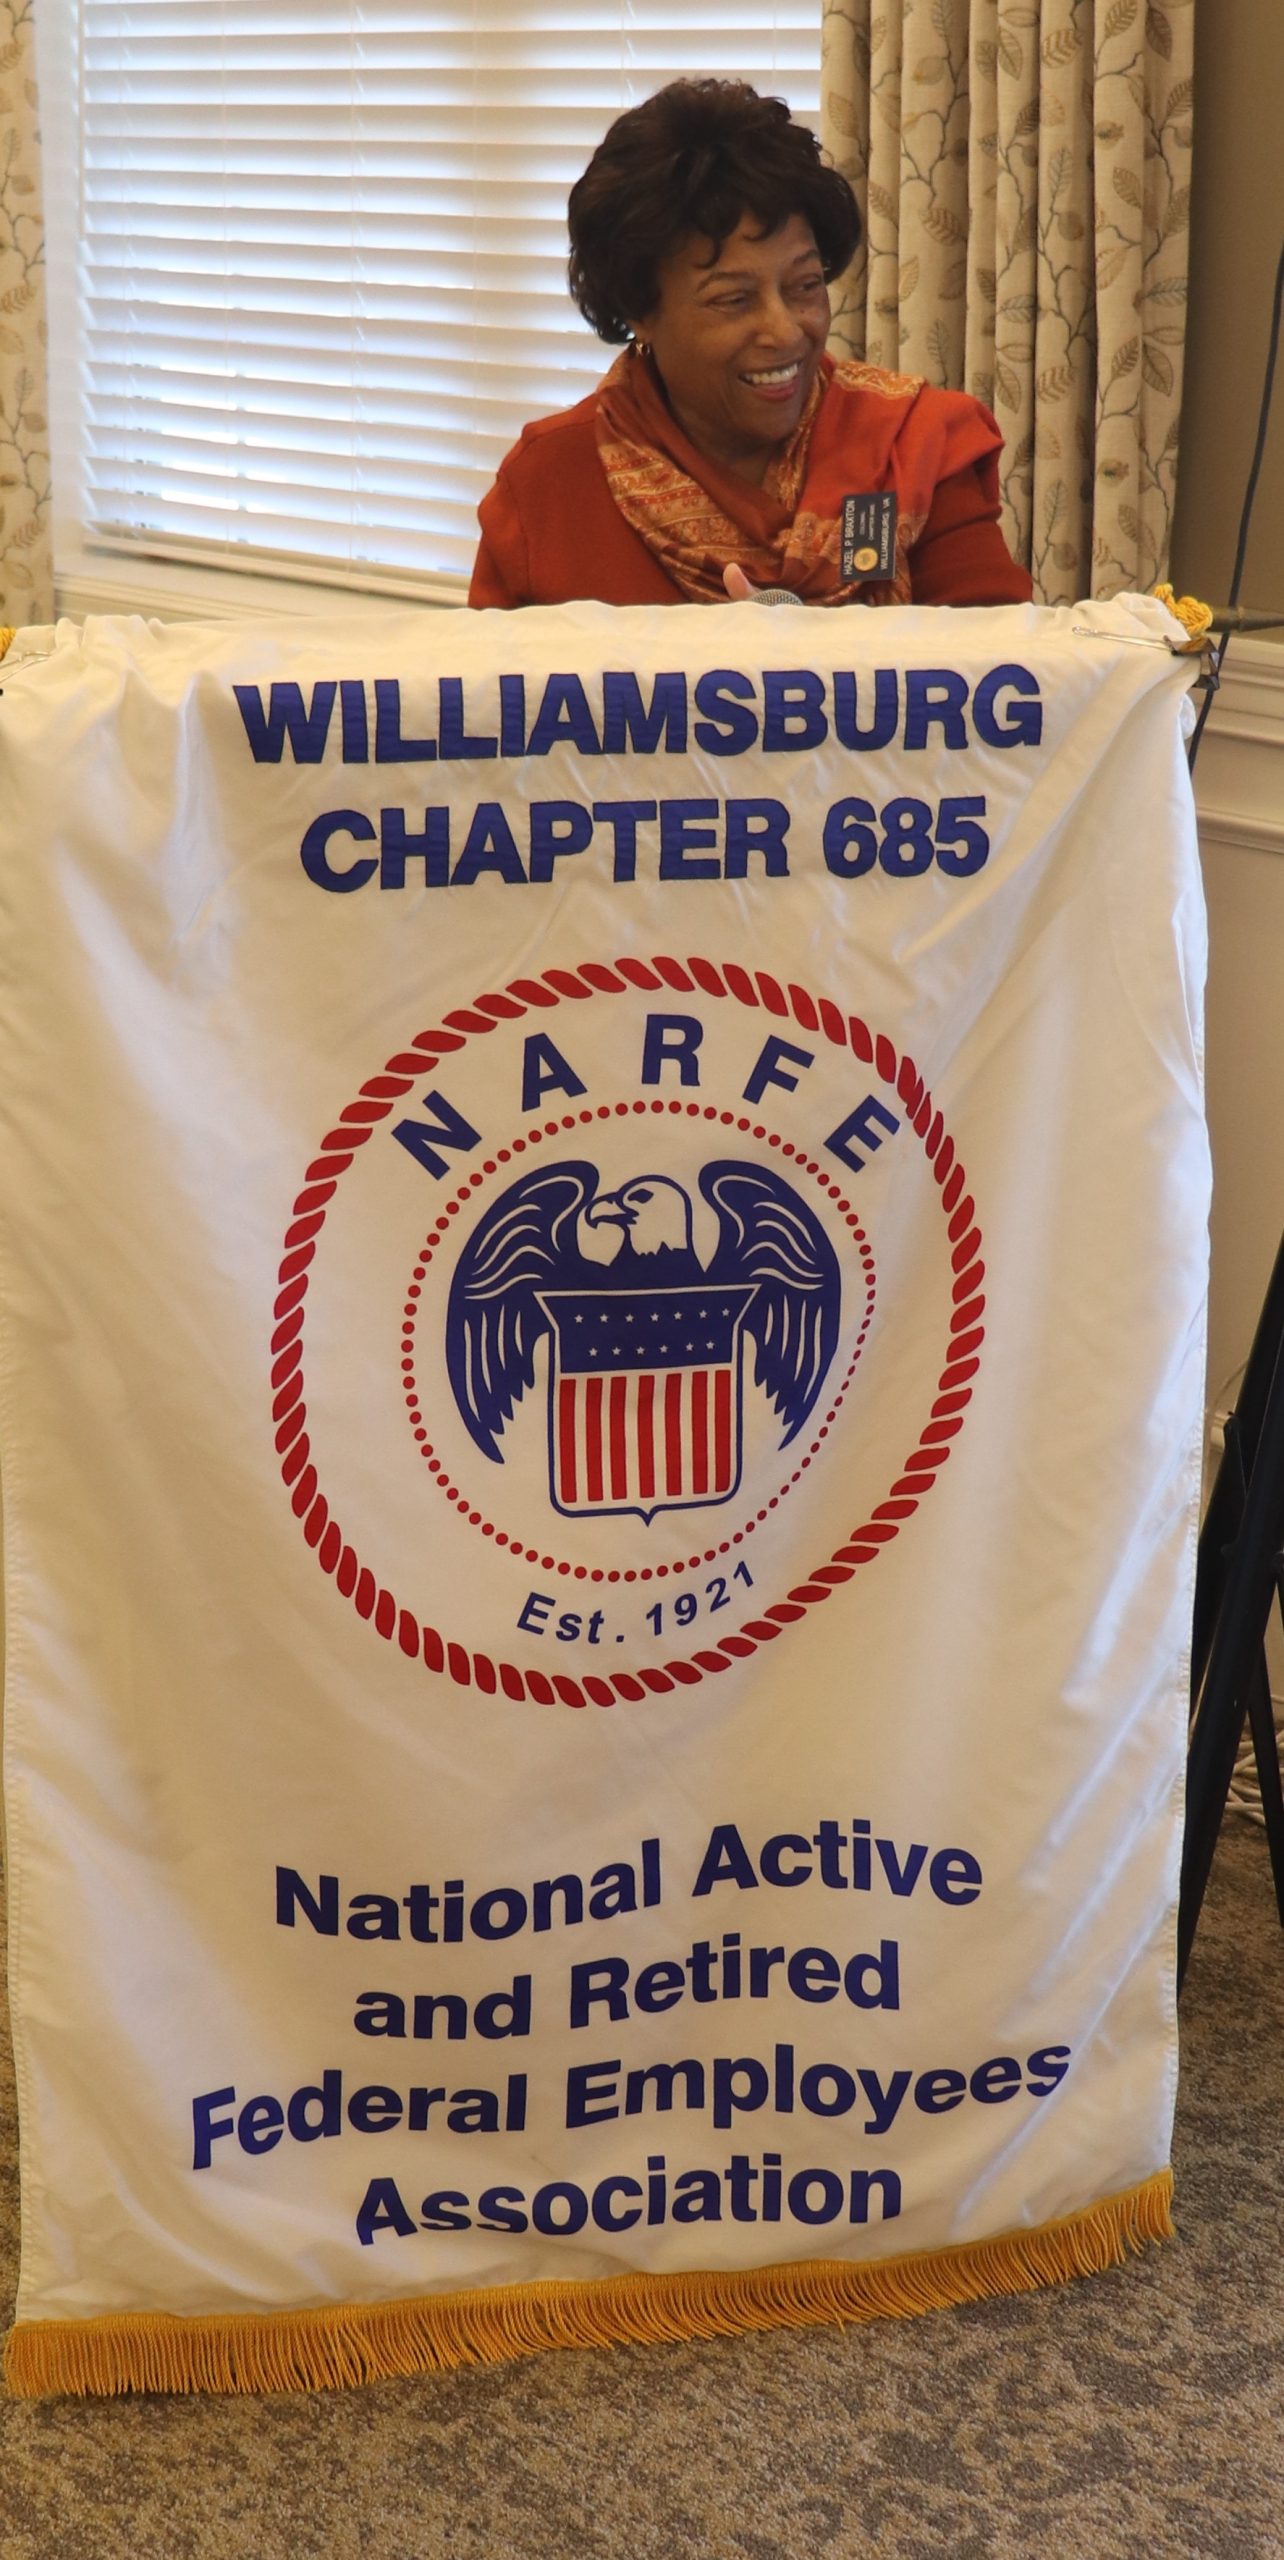 National Active and Retired Federal Employees Association